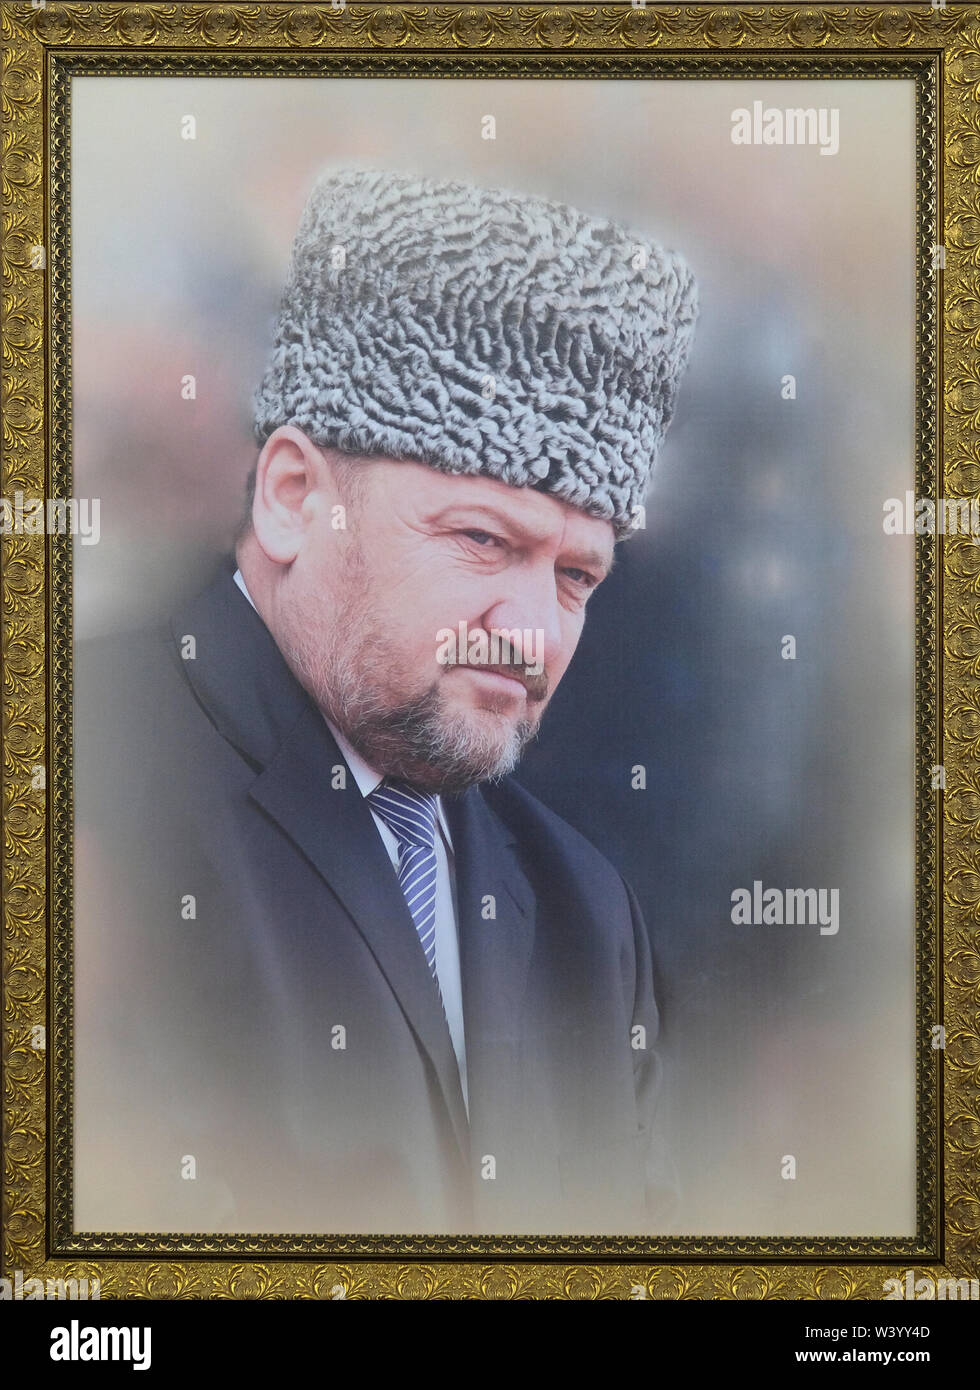 A photograph of Akhmad Kadyrov former Head of the Chechen Republic displayed at Akhmat Kadyrov museum overwhelmingly a shrine to Akhmat and Ramzan Kadyrov in Grozny the capital city of Chechnya in the North Caucasian Federal District of Russia. Stock Photo